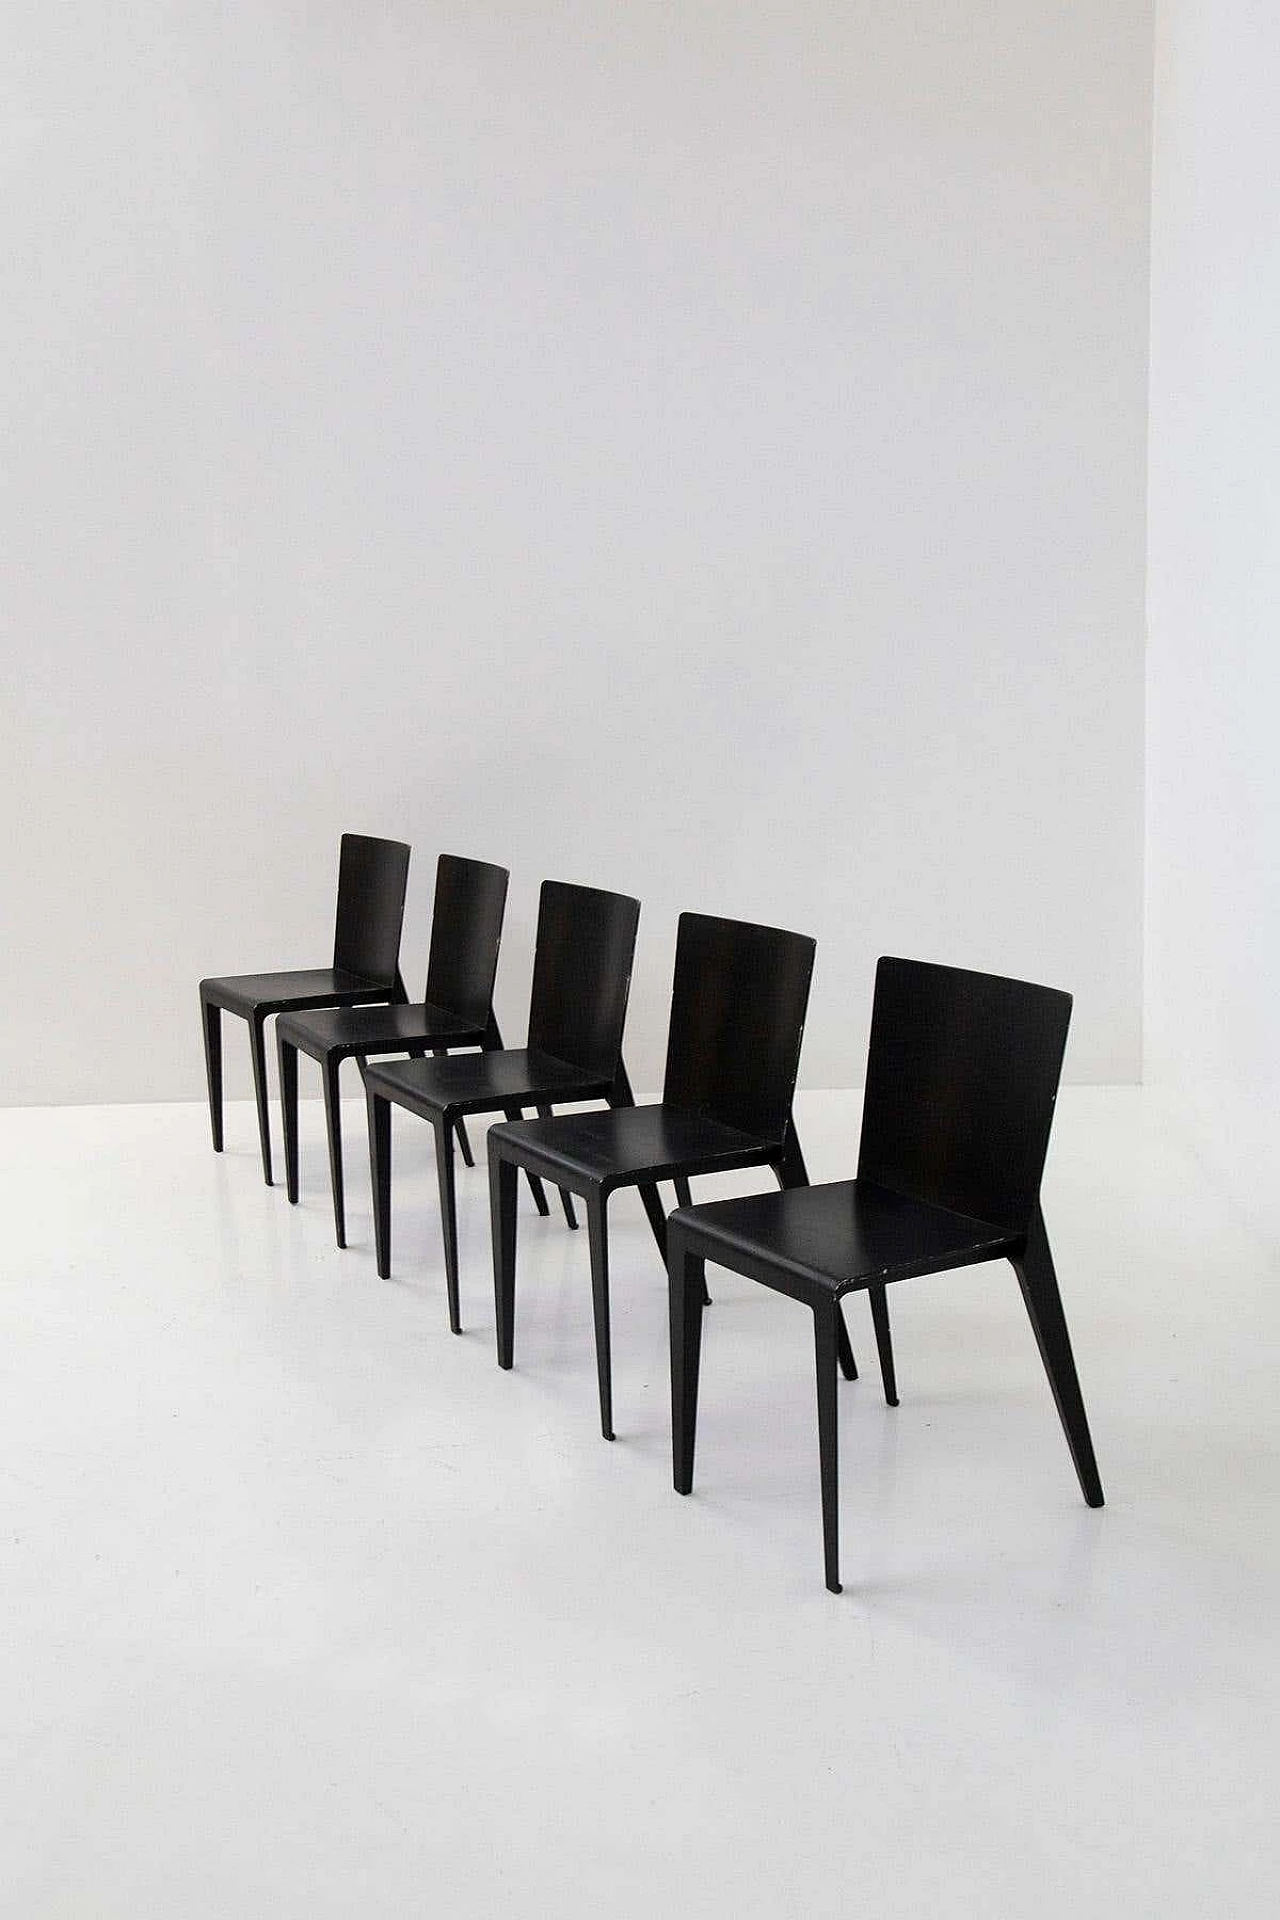 5 Alfa chairs by Hannes Wettstein for Molteni, 2001 1